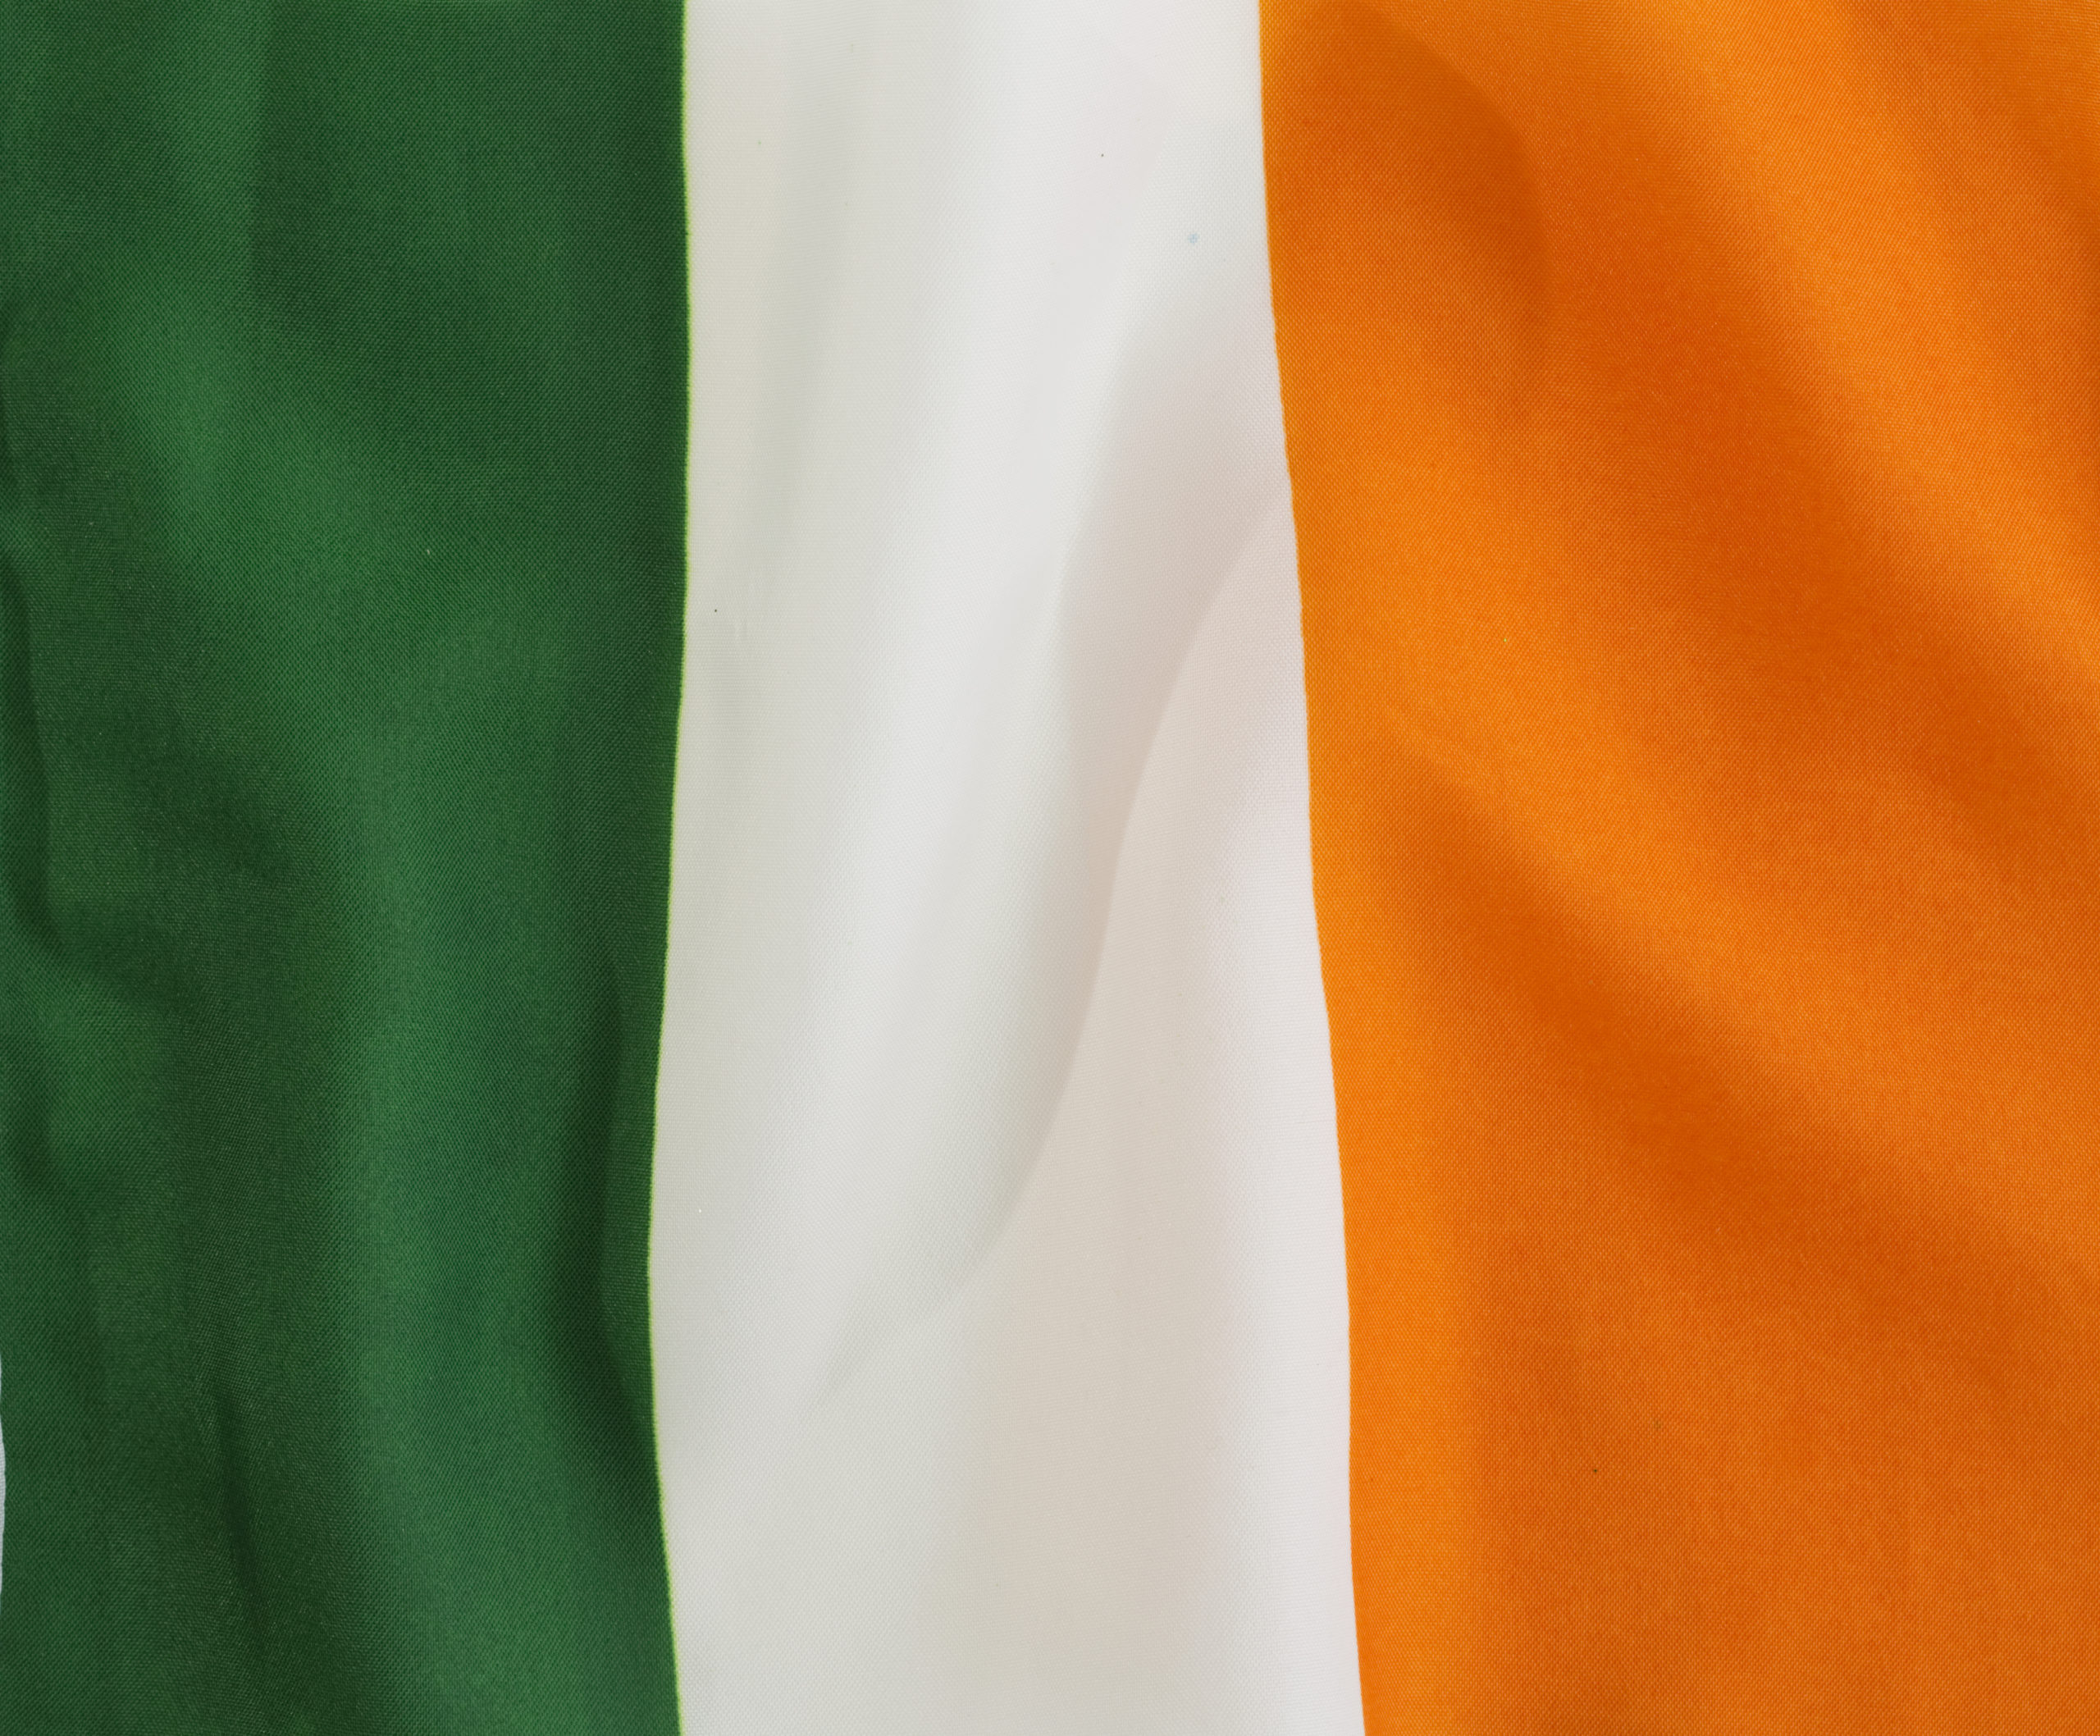 The Irish Flag - Many establishments display the familiar Irish tricolor flag on St. Patrick's Day, and paradegoers may even wave miniature versions of this significant symbol in support of those marching. This instantly recognizable flag has a rich history. Equal parts green, white and orange, the flag was designed to foster peace in the country that had experienced considerable turmoil due to the divide between the country's Protestant and Catholic residents.